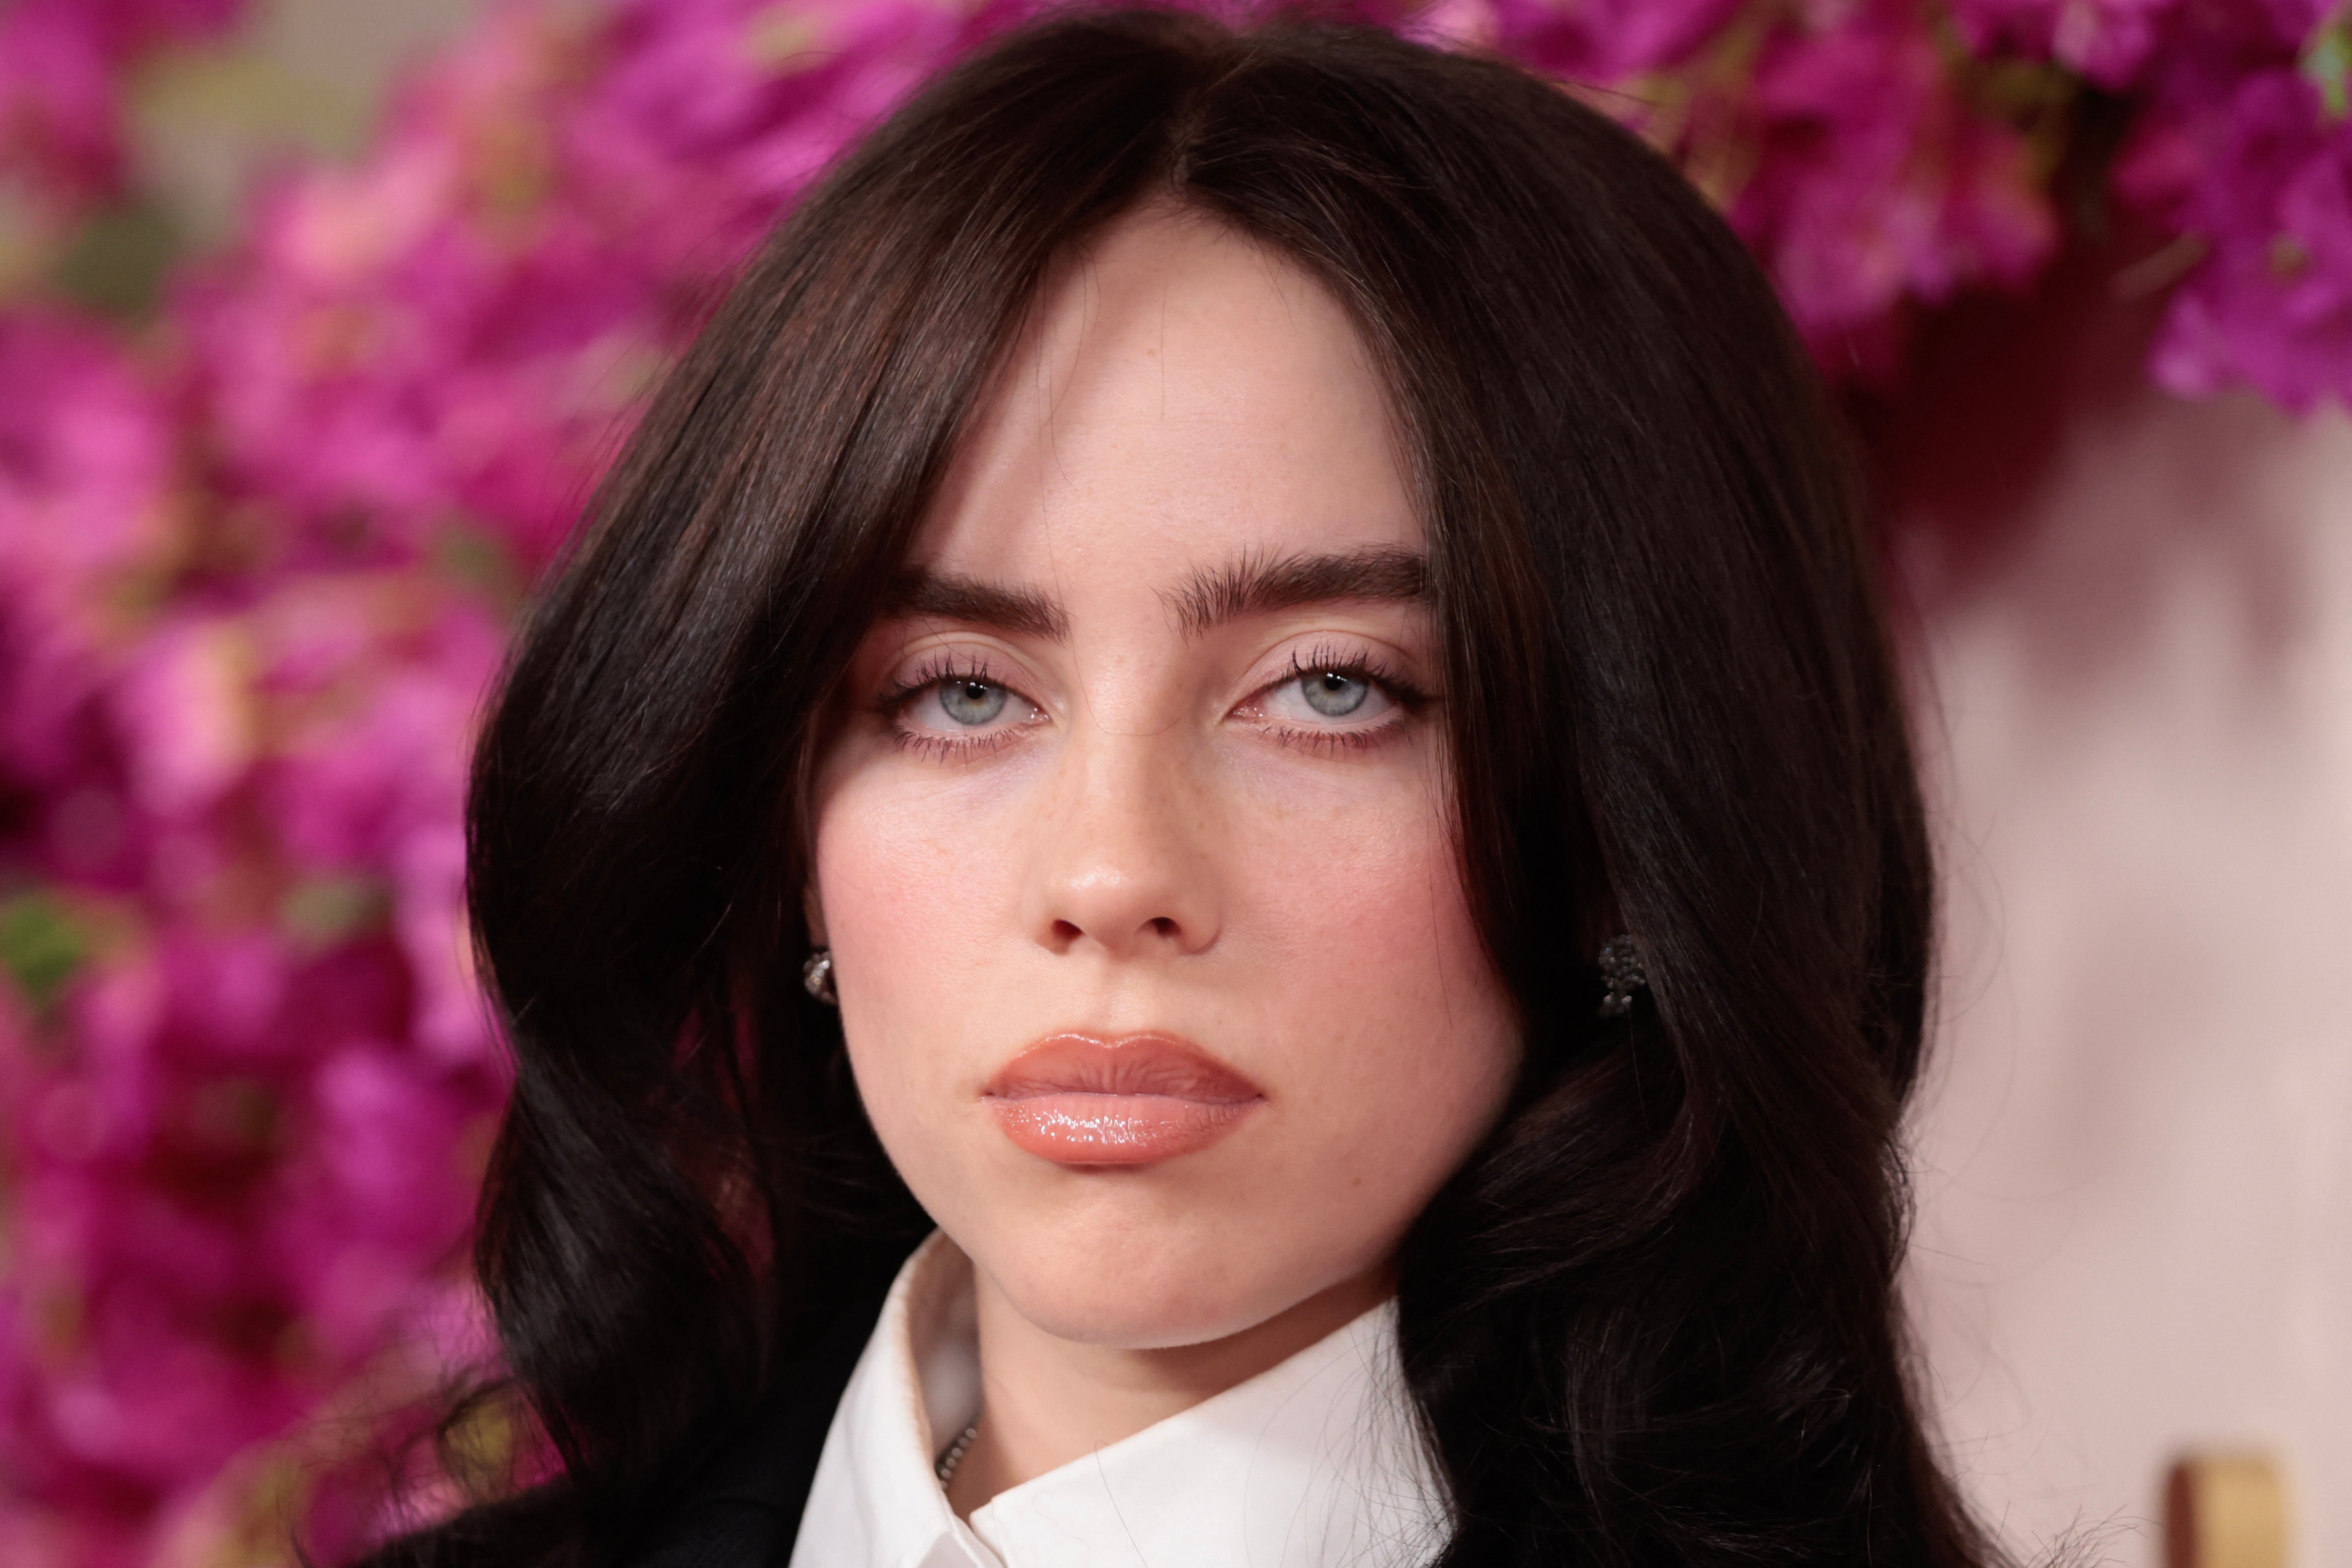 Billie Eilish has revealed she was ghosted for the first time by a man she had known for years.